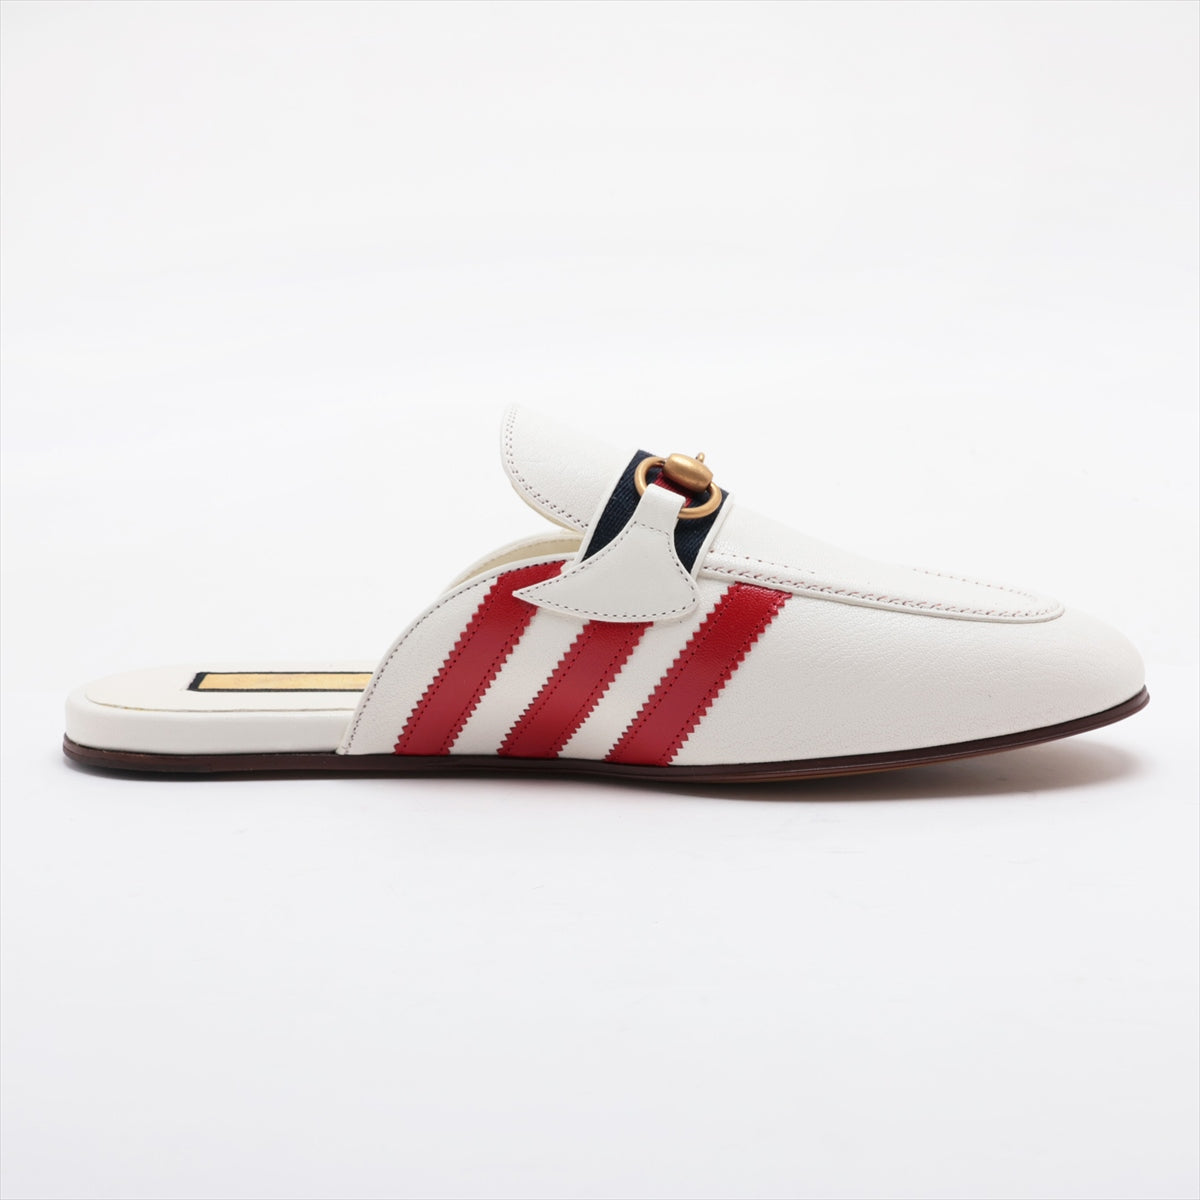 Gucci x adidas Horsebit Leather Mule 10 Men's Red x white 721481 Slipper Three Stripes There is a storage bag